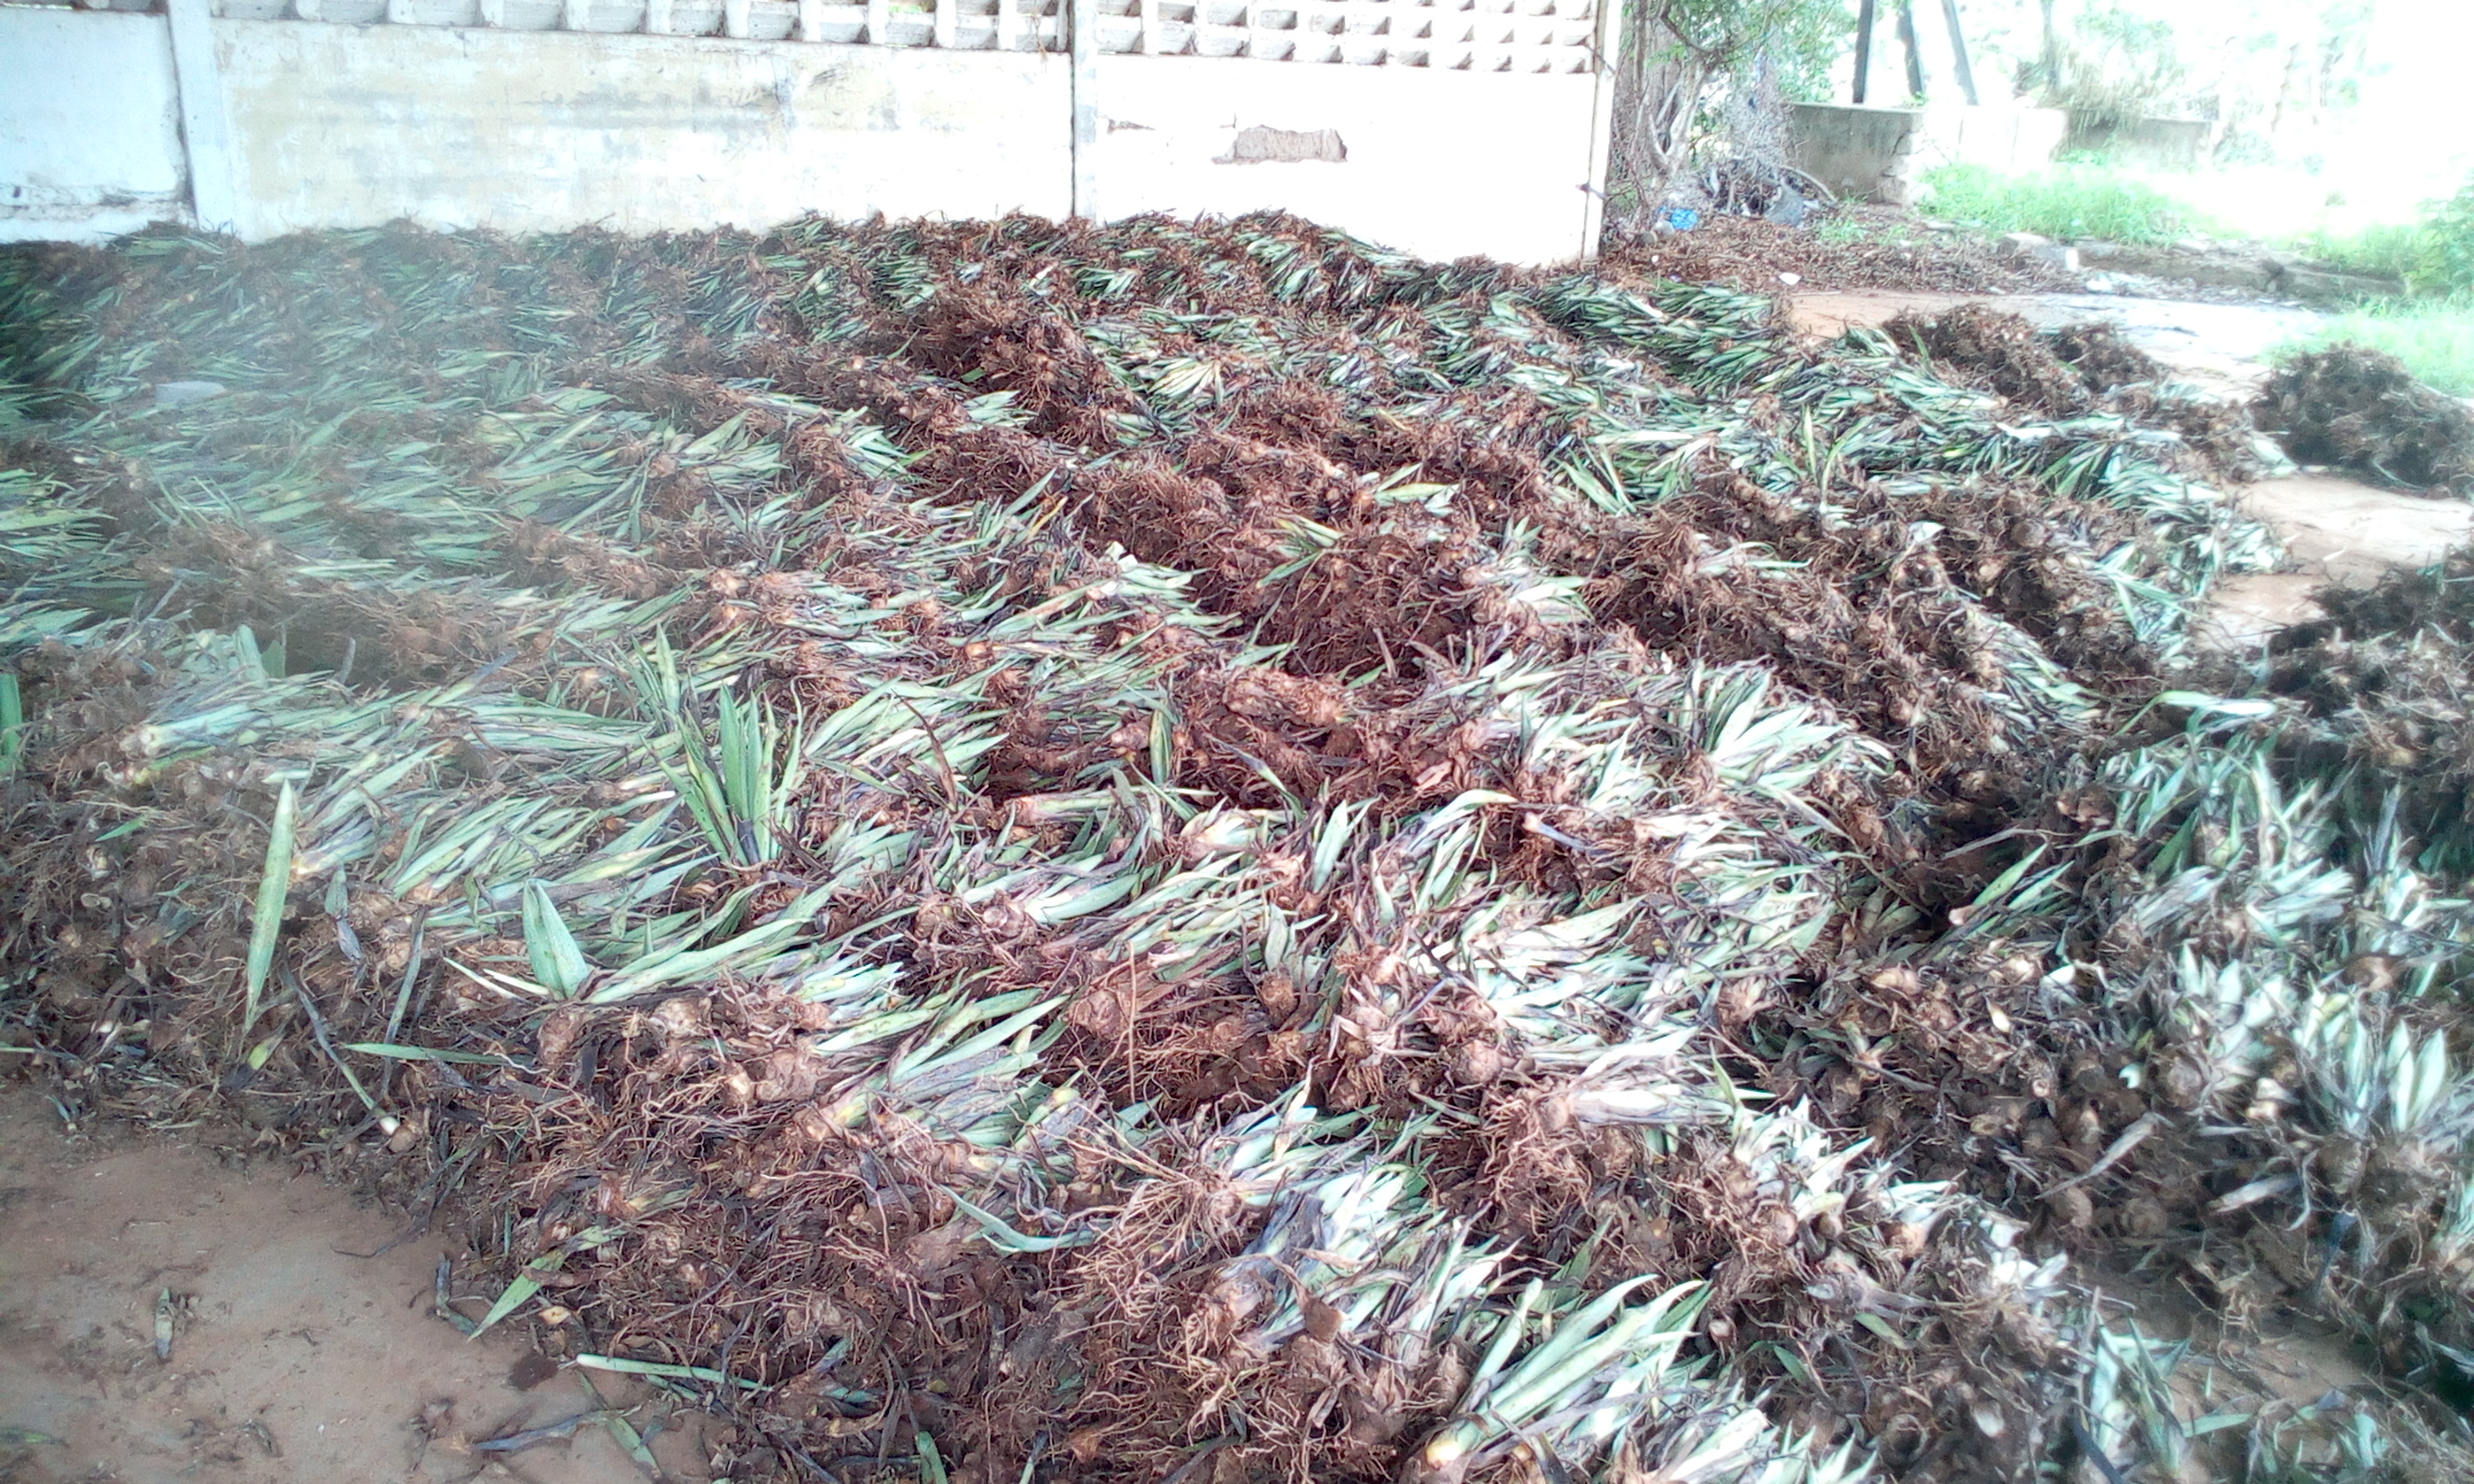 Sisal Preprocessing Point after harvesting sisal seedlings ready for planting in the farms in KishapuESO at Kishapu